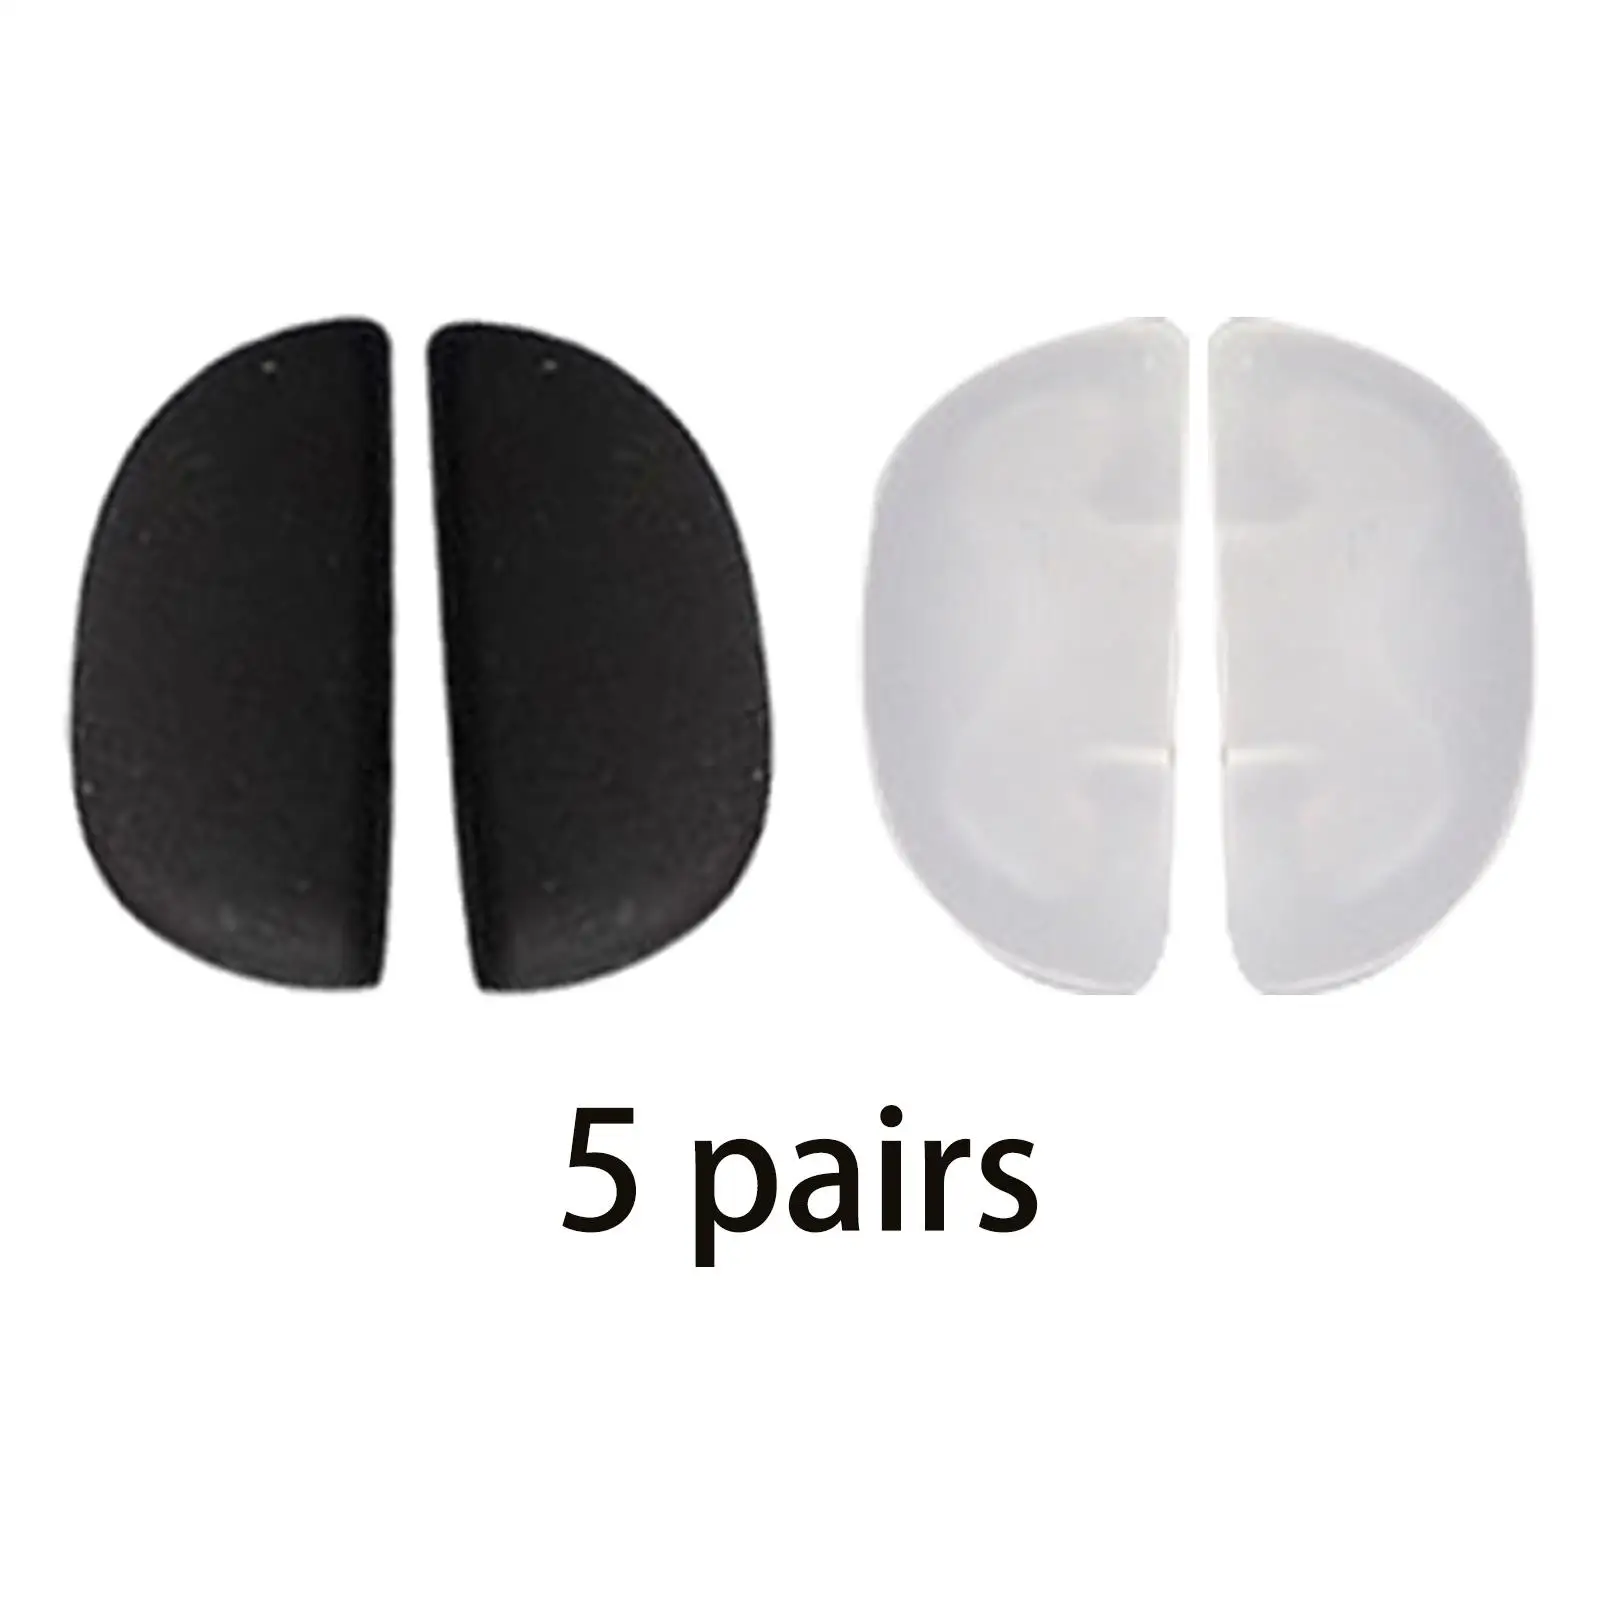 10 Pieces Kids Eyeglass Nose Pads Thickened Replace Parts for Sunglasses